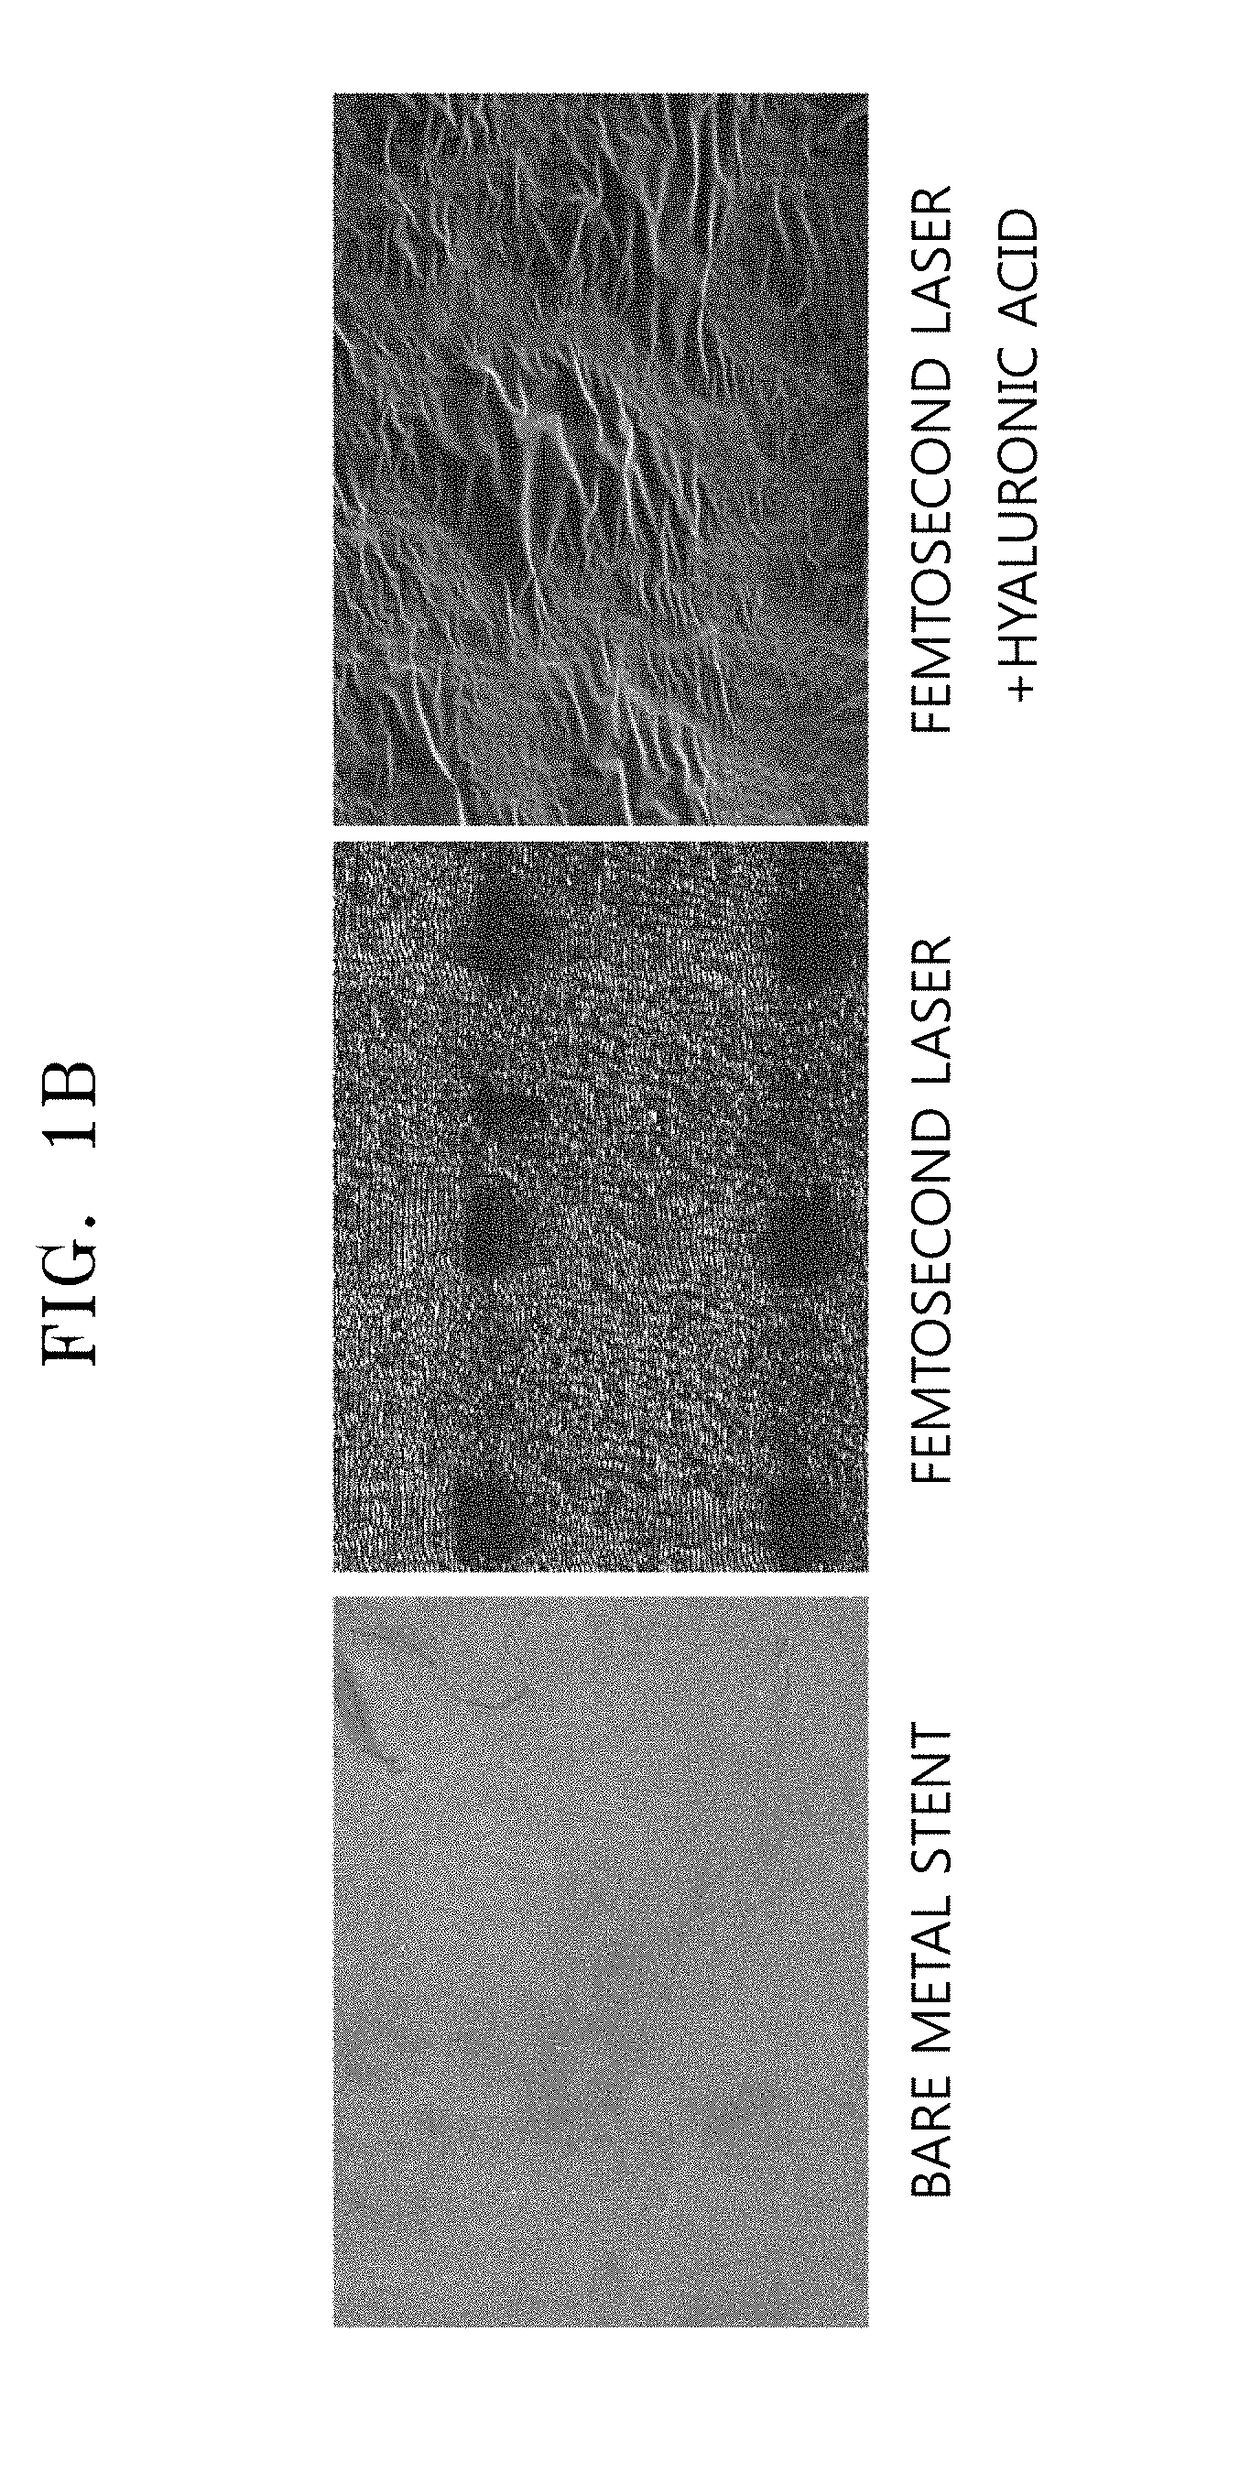 Stent for inhibiting restenosis and stimulating reendothelialization prepared by femtosecond laser processing and method of preparing the same